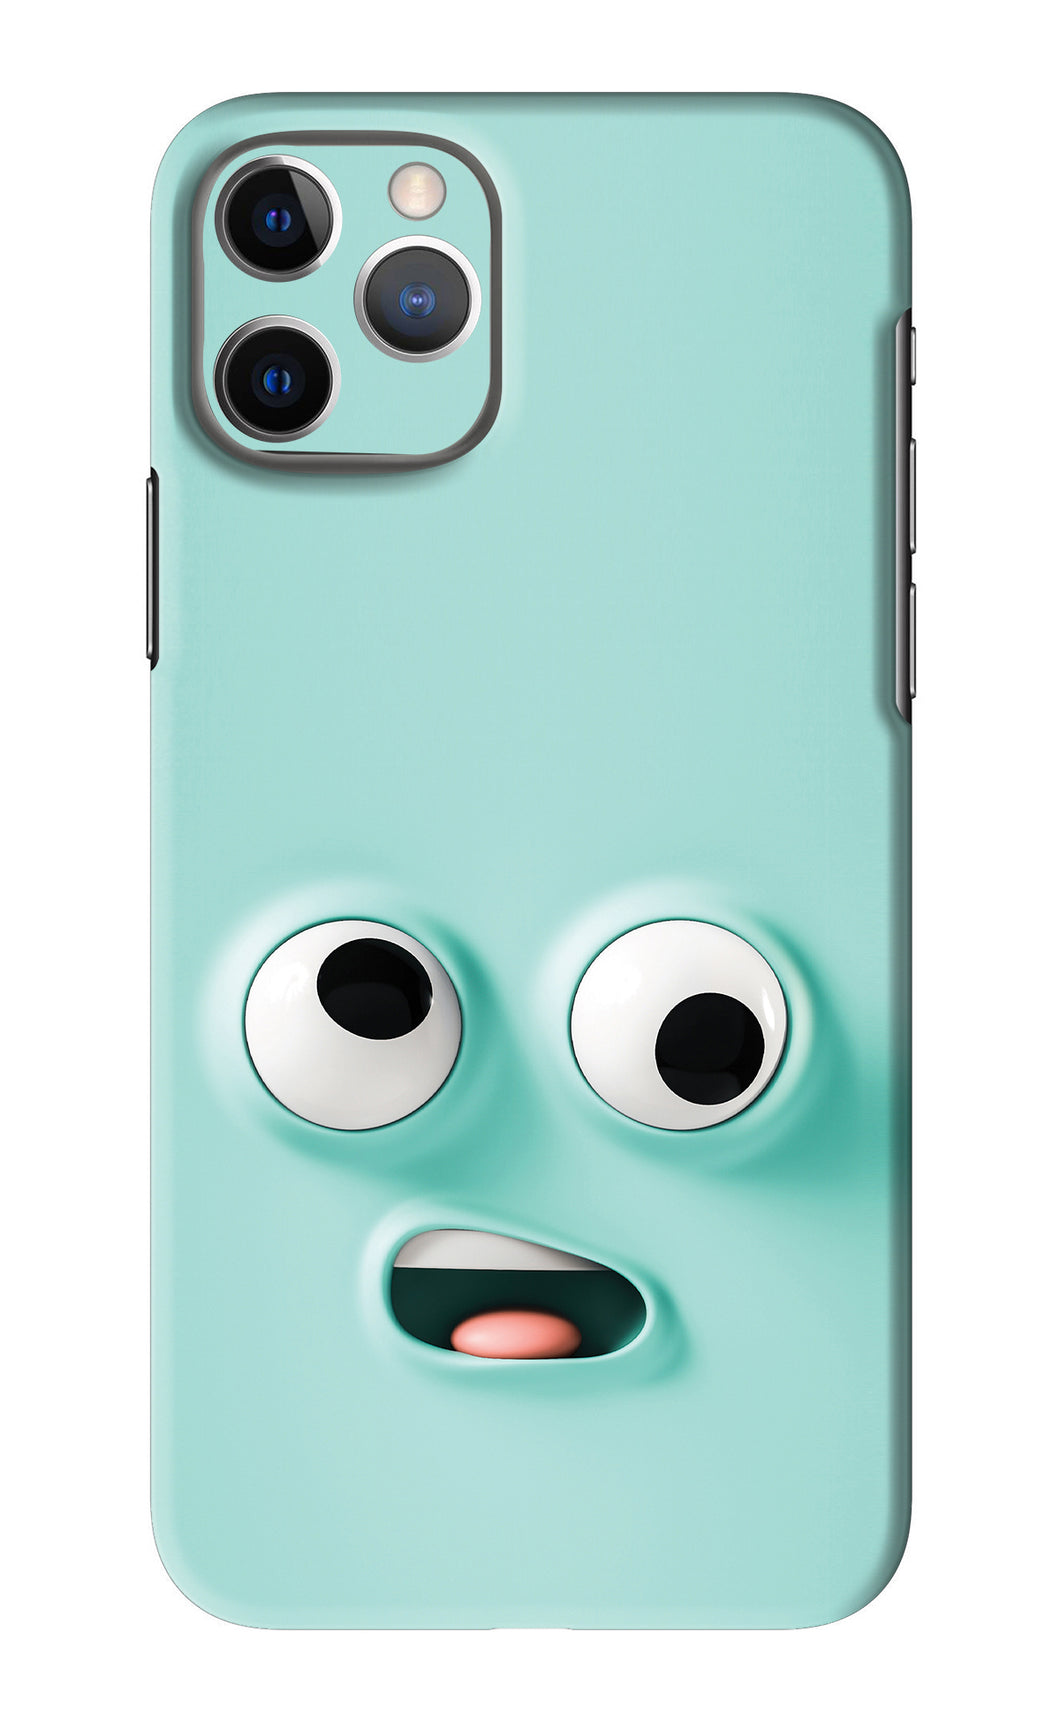 Silly Face Cartoon iPhone 11 Pro Max Back Skin Wrap